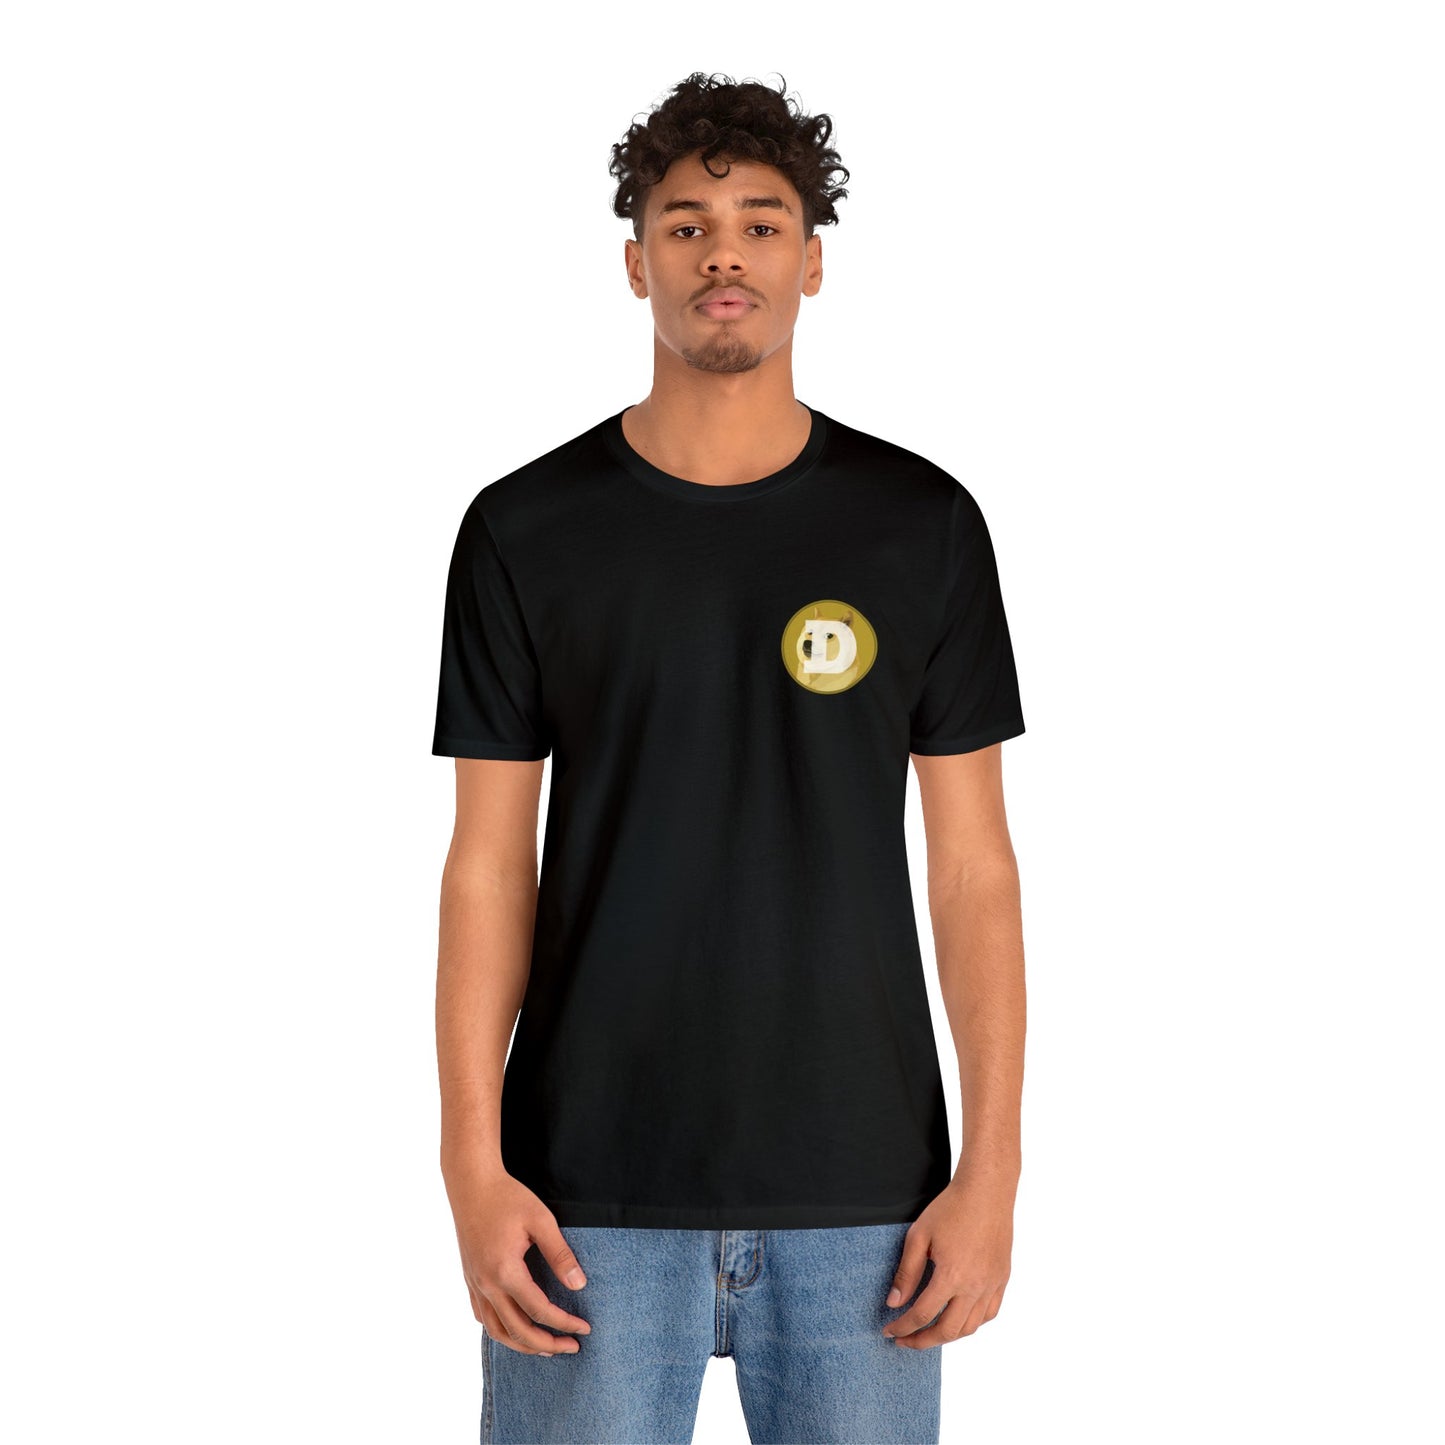 Original Dogecoin Logo With D Inside In Small T-Shirt